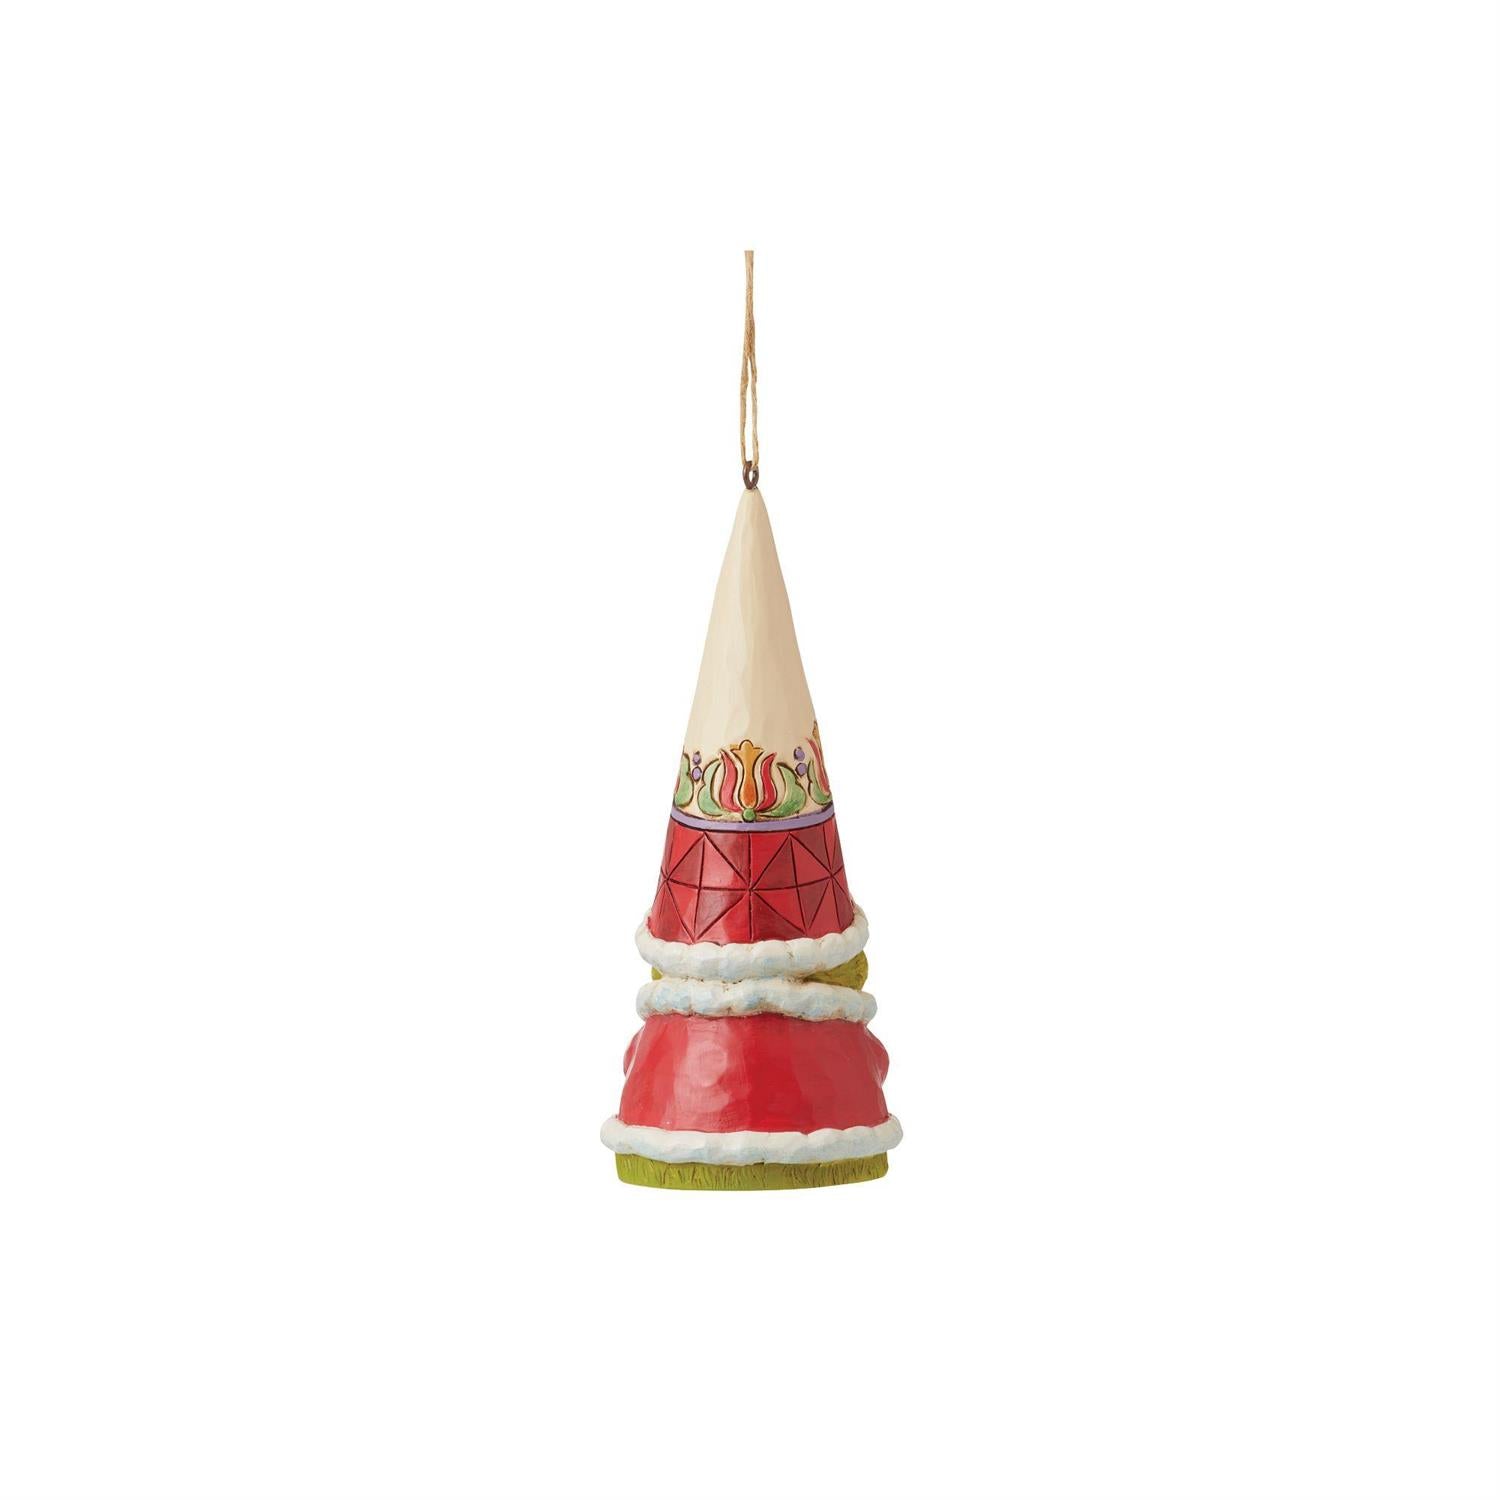 Grinch Gnome Hands Clenched Hanging Ornament